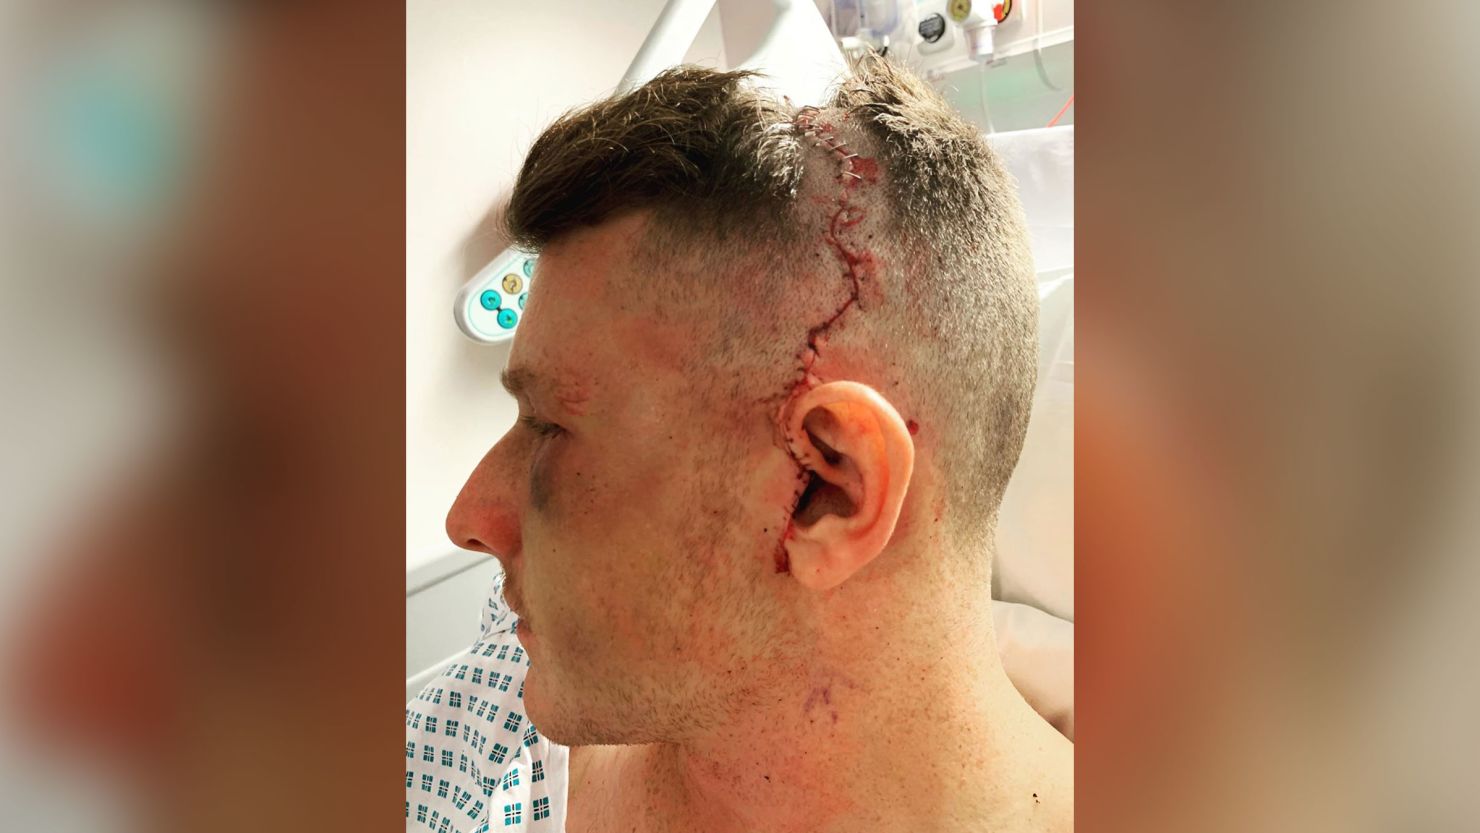 Ward had 31 staples removed from his head on Monday.